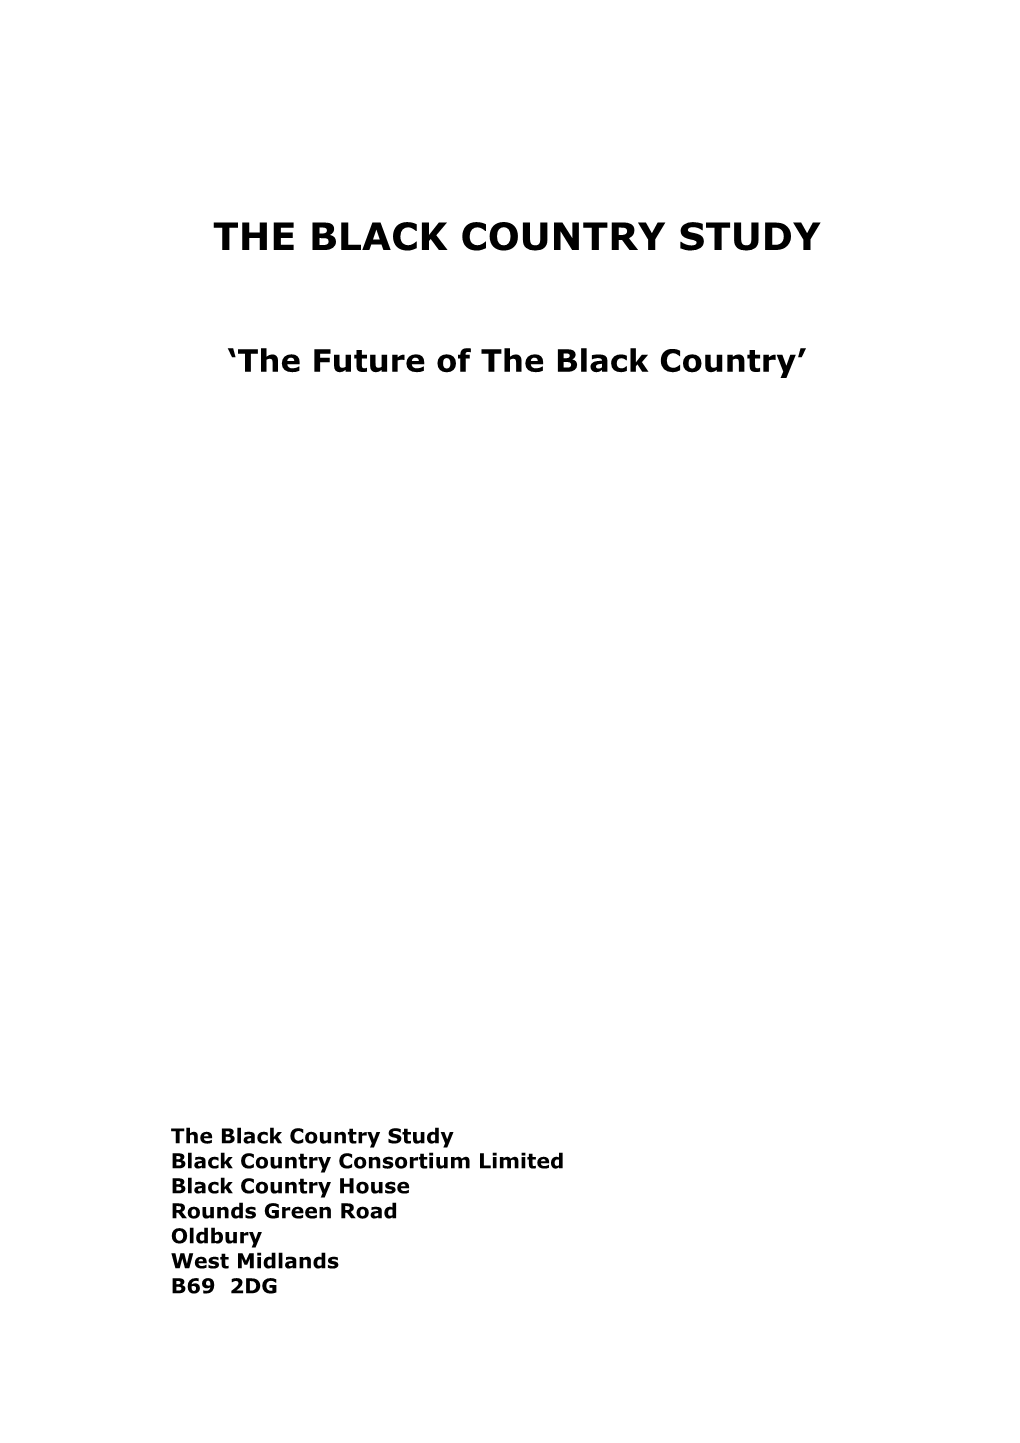 The Black Country Study